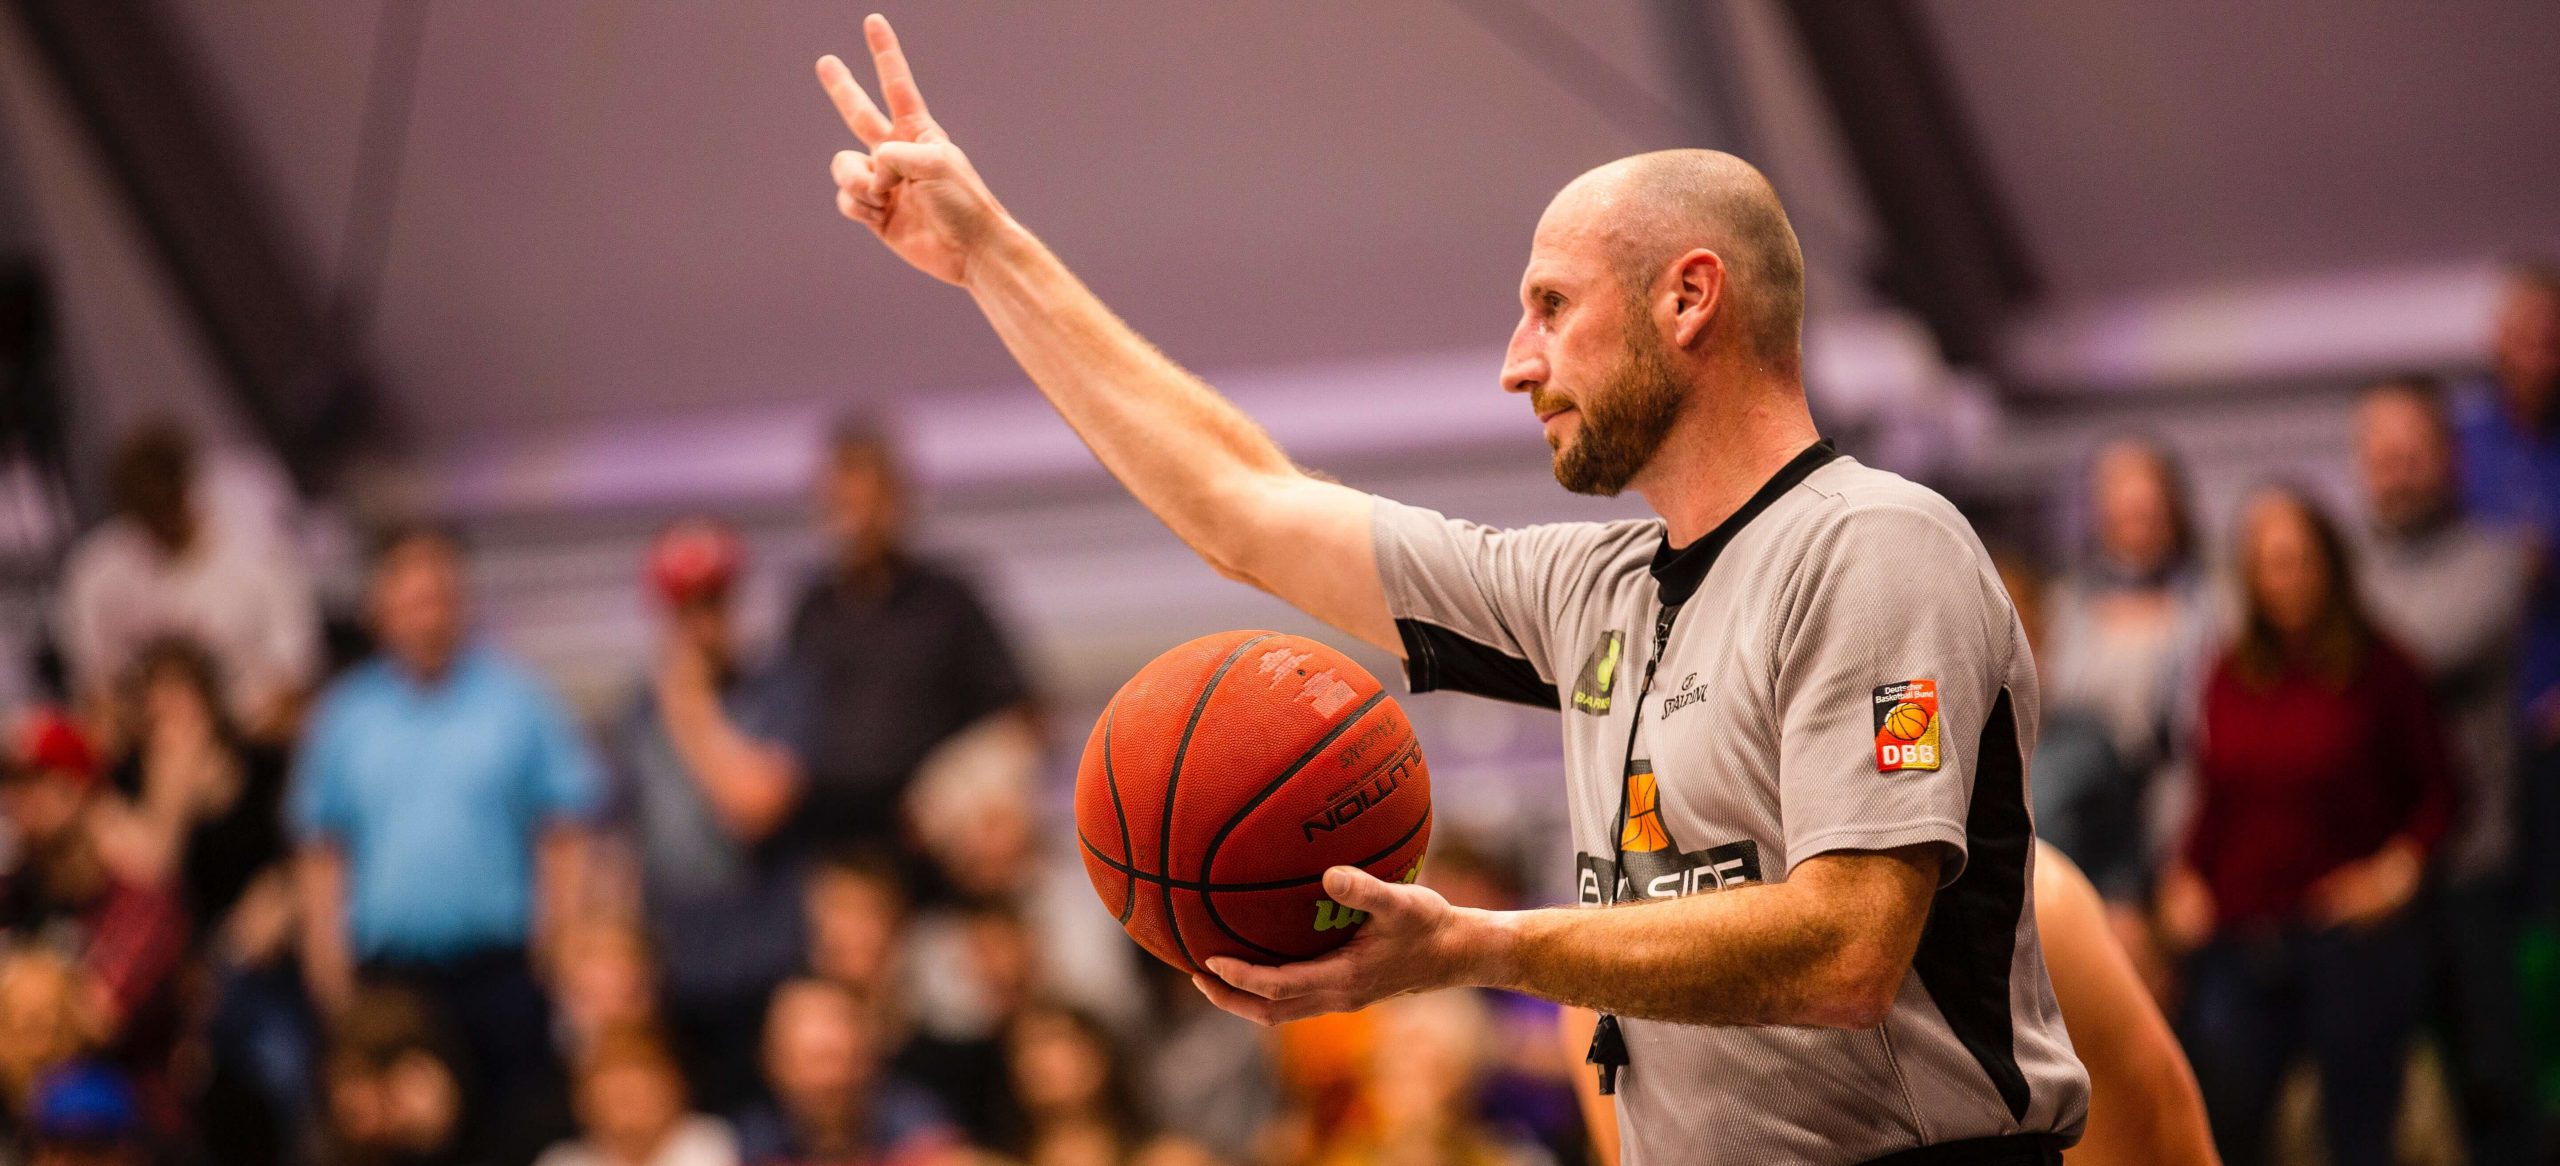 How To Become A Basketball Coach